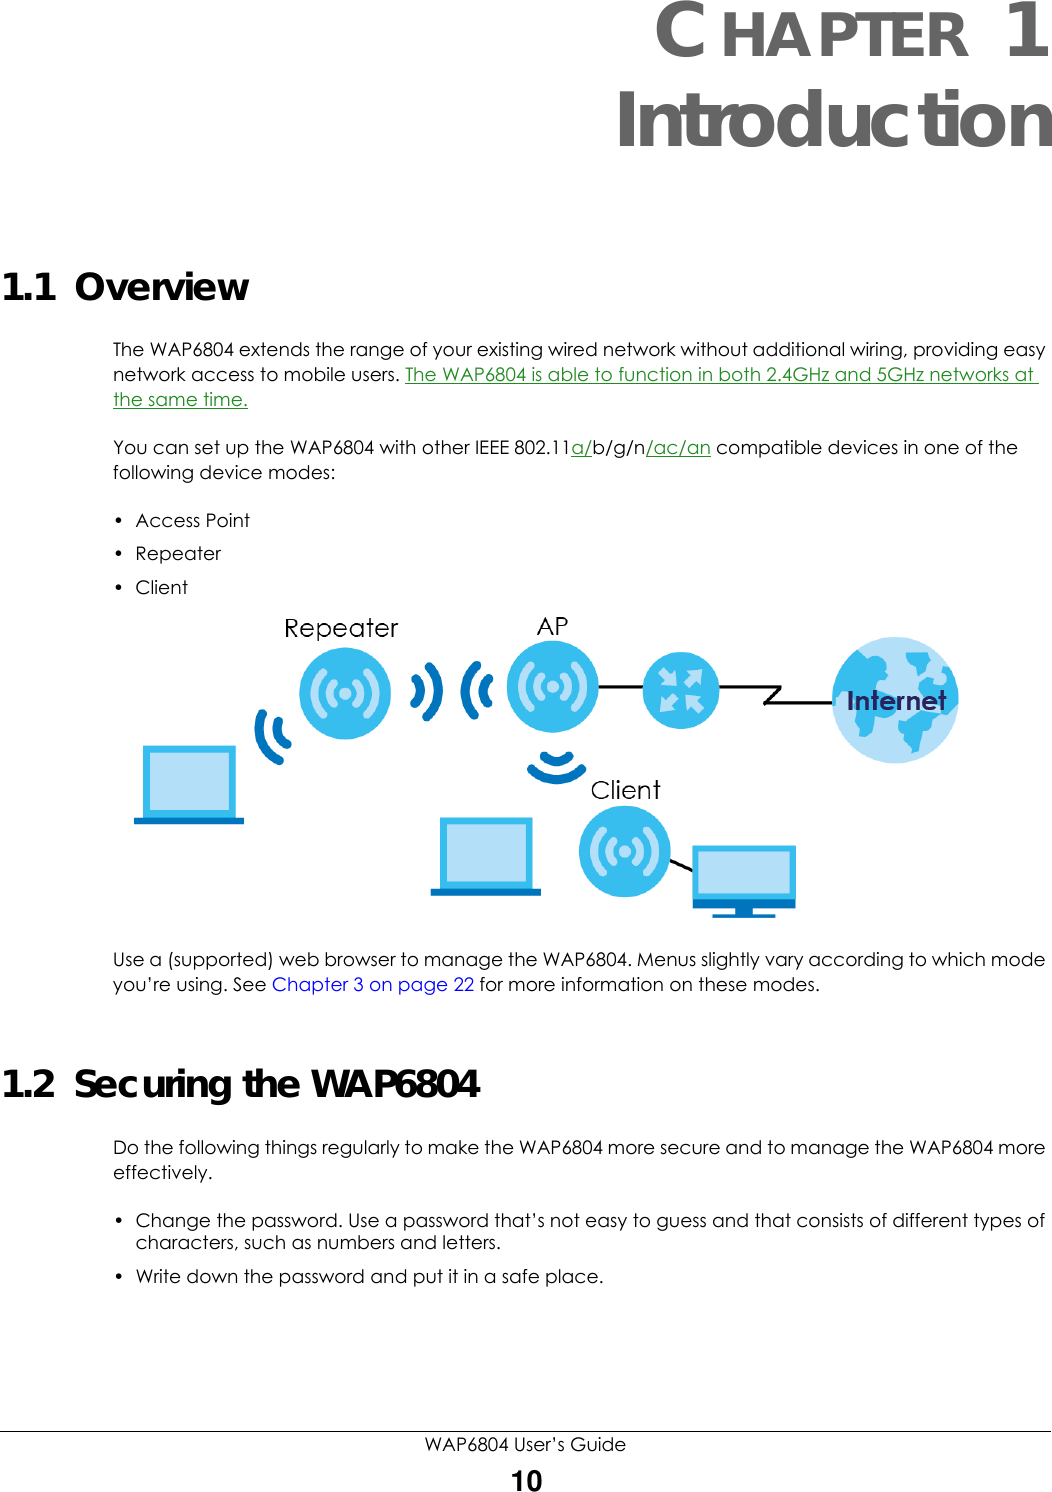 WAP6804 User’s Guide10CHAPTER 1Introduction1.1  OverviewThe WAP6804 extends the range of your existing wired network without additional wiring, providing easy network access to mobile users. The WAP6804 is able to function in both 2.4GHz and 5GHz networks at the same time.You can set up the WAP6804 with other IEEE 802.11a/b/g/n/ac/an compatible devices in one of the following device modes:• Access Point•Repeater• Client Use a (supported) web browser to manage the WAP6804. Menus slightly vary according to which mode you’re using. See Chapter 3 on page 22 for more information on these modes.1.2  Securing the WAP6804Do the following things regularly to make the WAP6804 more secure and to manage the WAP6804 more effectively.• Change the password. Use a password that’s not easy to guess and that consists of different types of characters, such as numbers and letters.• Write down the password and put it in a safe place.